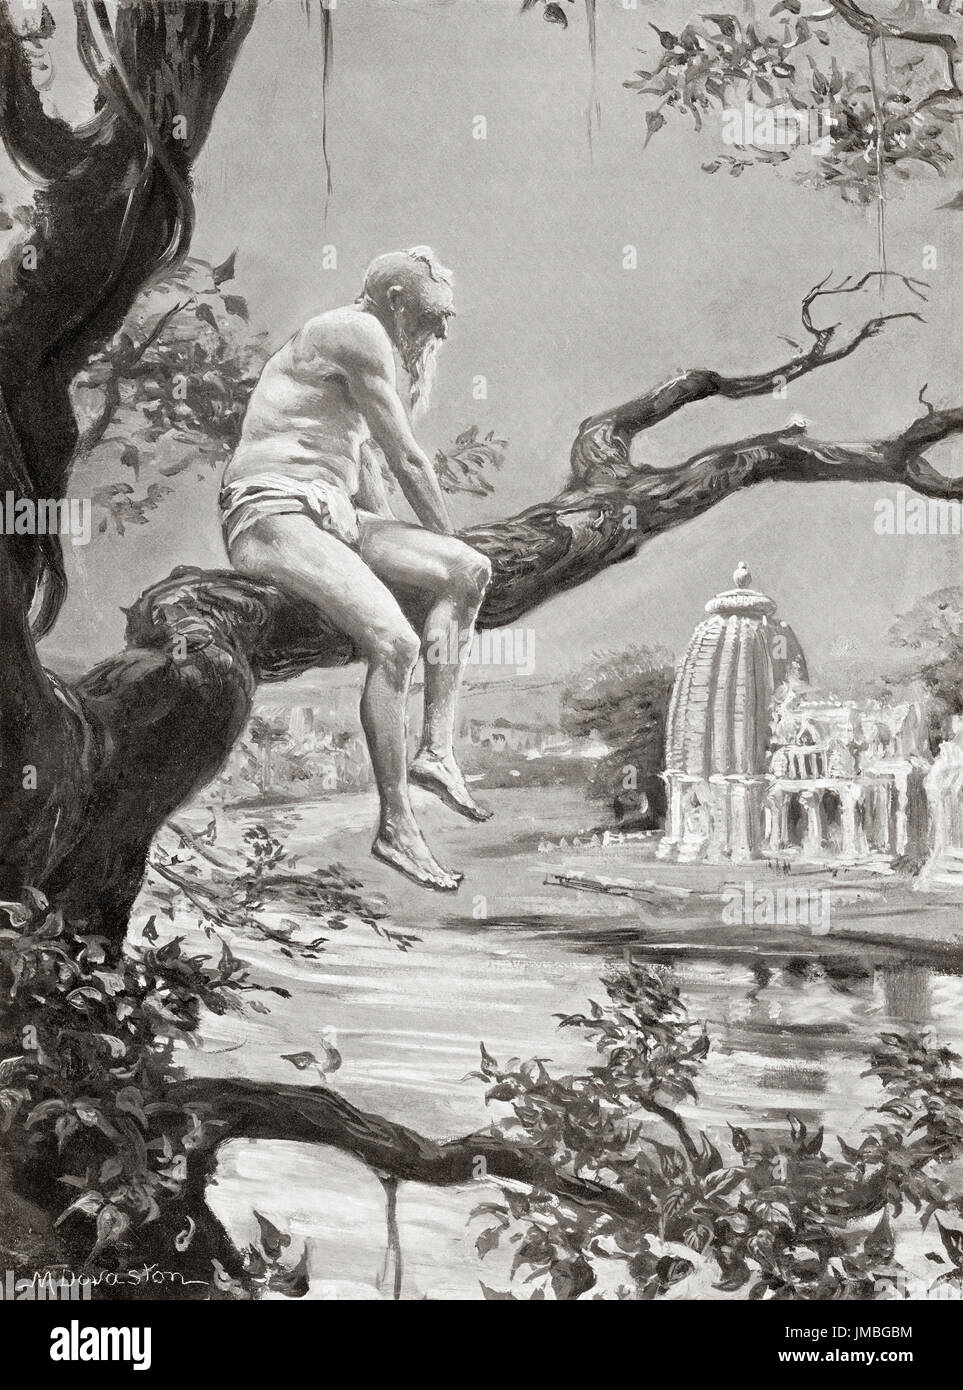 Artist's impression of Dhanga at the end of his reign, after living to be over one hundred years old he abandoned his body at the confluence of the Ganges and Yamuna rivers.  Dhanga, reigned c. 950-999 AD, aka Dhaṇgadeva.  King of the Chandela dynasty of India.  After the painting by Margaret Dovaston (1884-1954).  From Hutchinson's History of the Nations, published 1915. Stock Photo